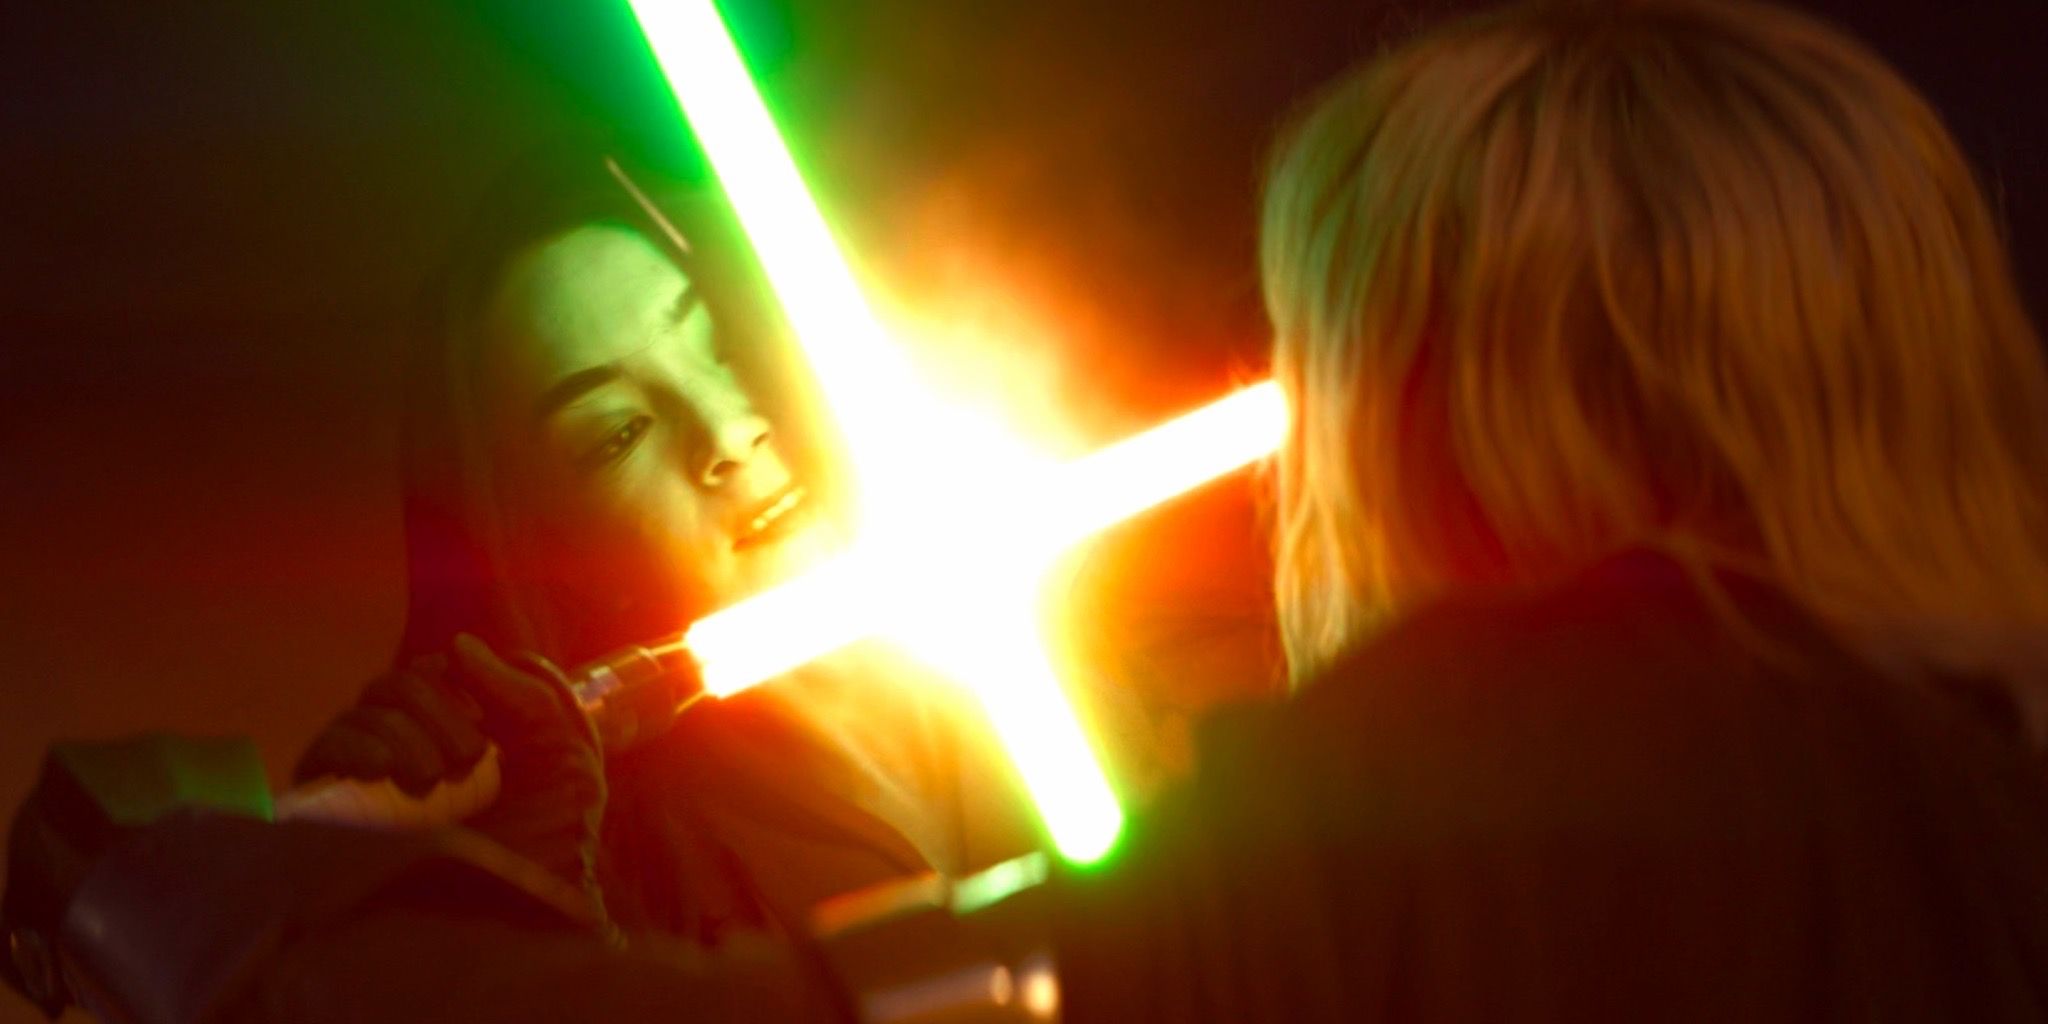 Star Wars Made History With Ahsoka Episode 1's Lightsaber Fight